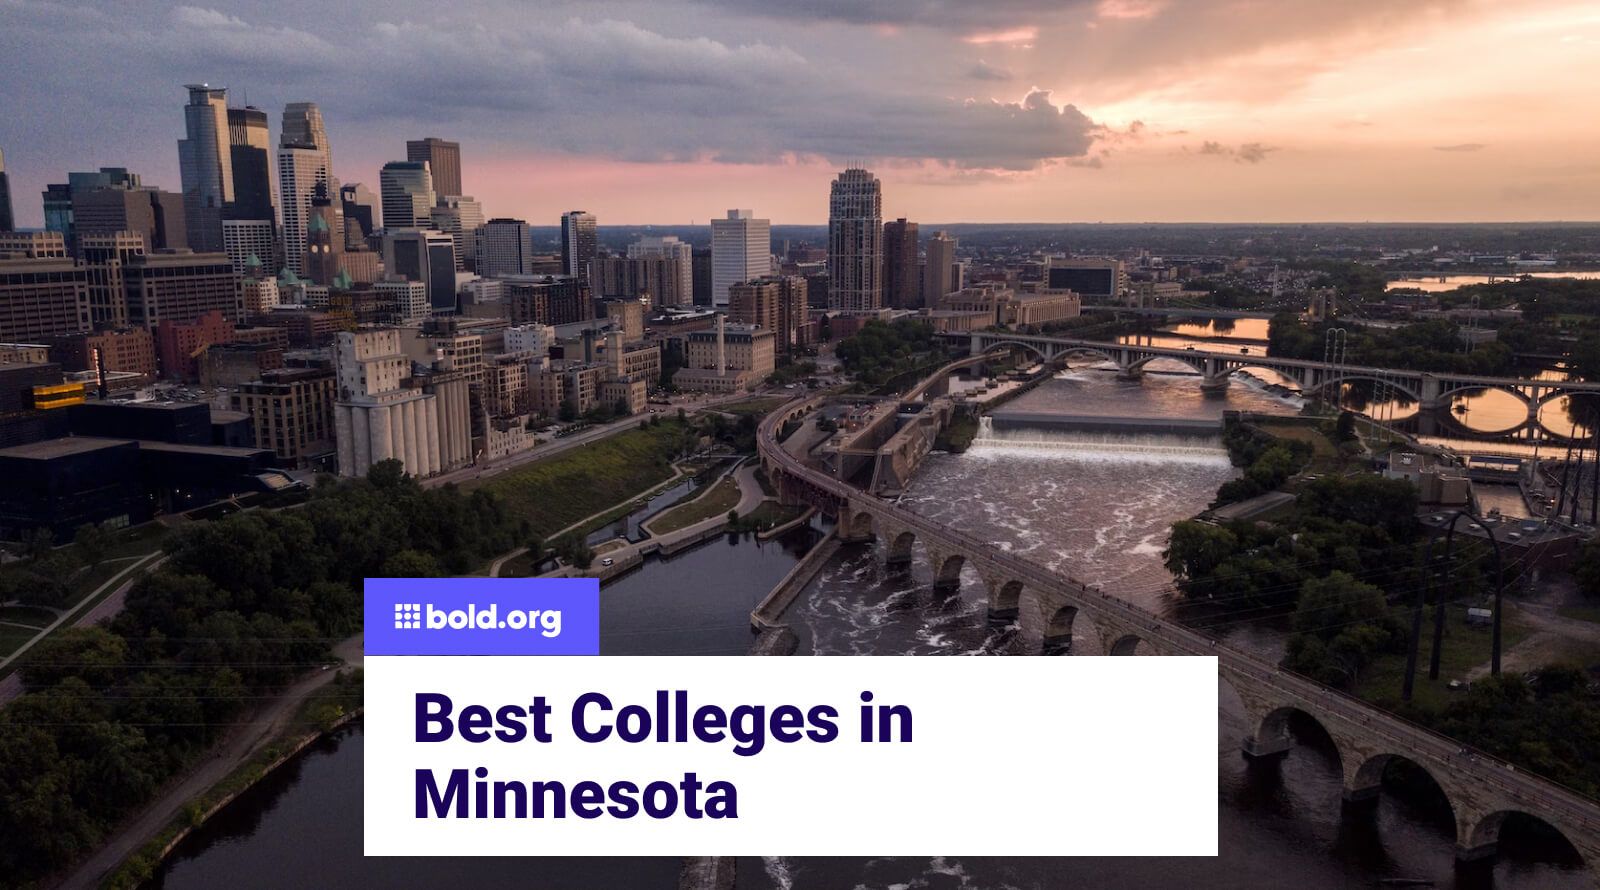 Minnesota's top colleges ranked by U.S. News, Wall Street Journal -  Minneapolis / St. Paul Business Journal